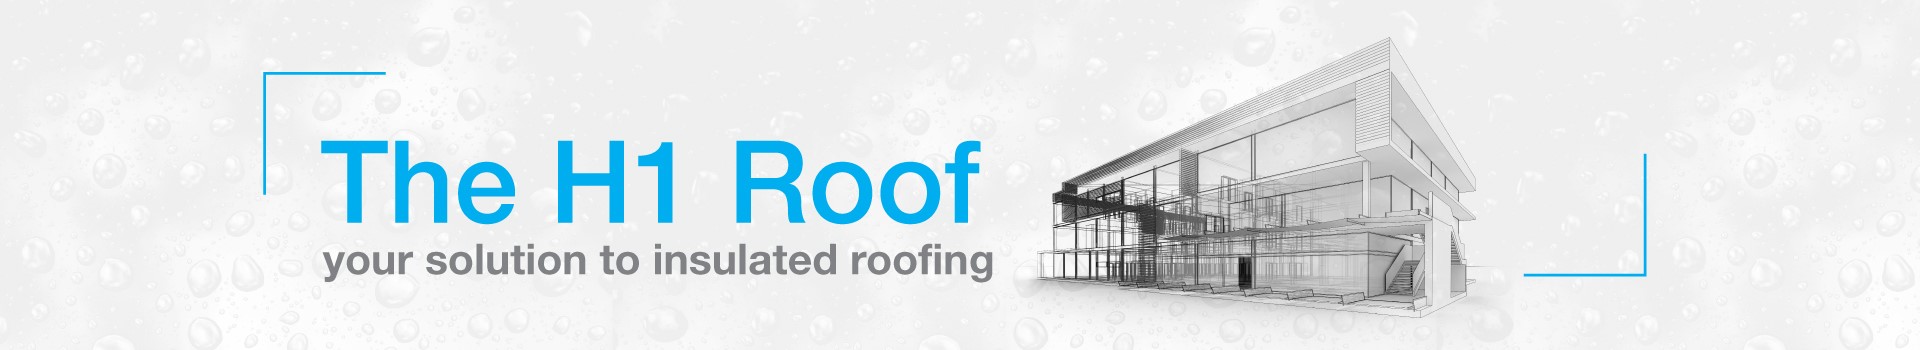 WarmSpan² - the H1 Roof